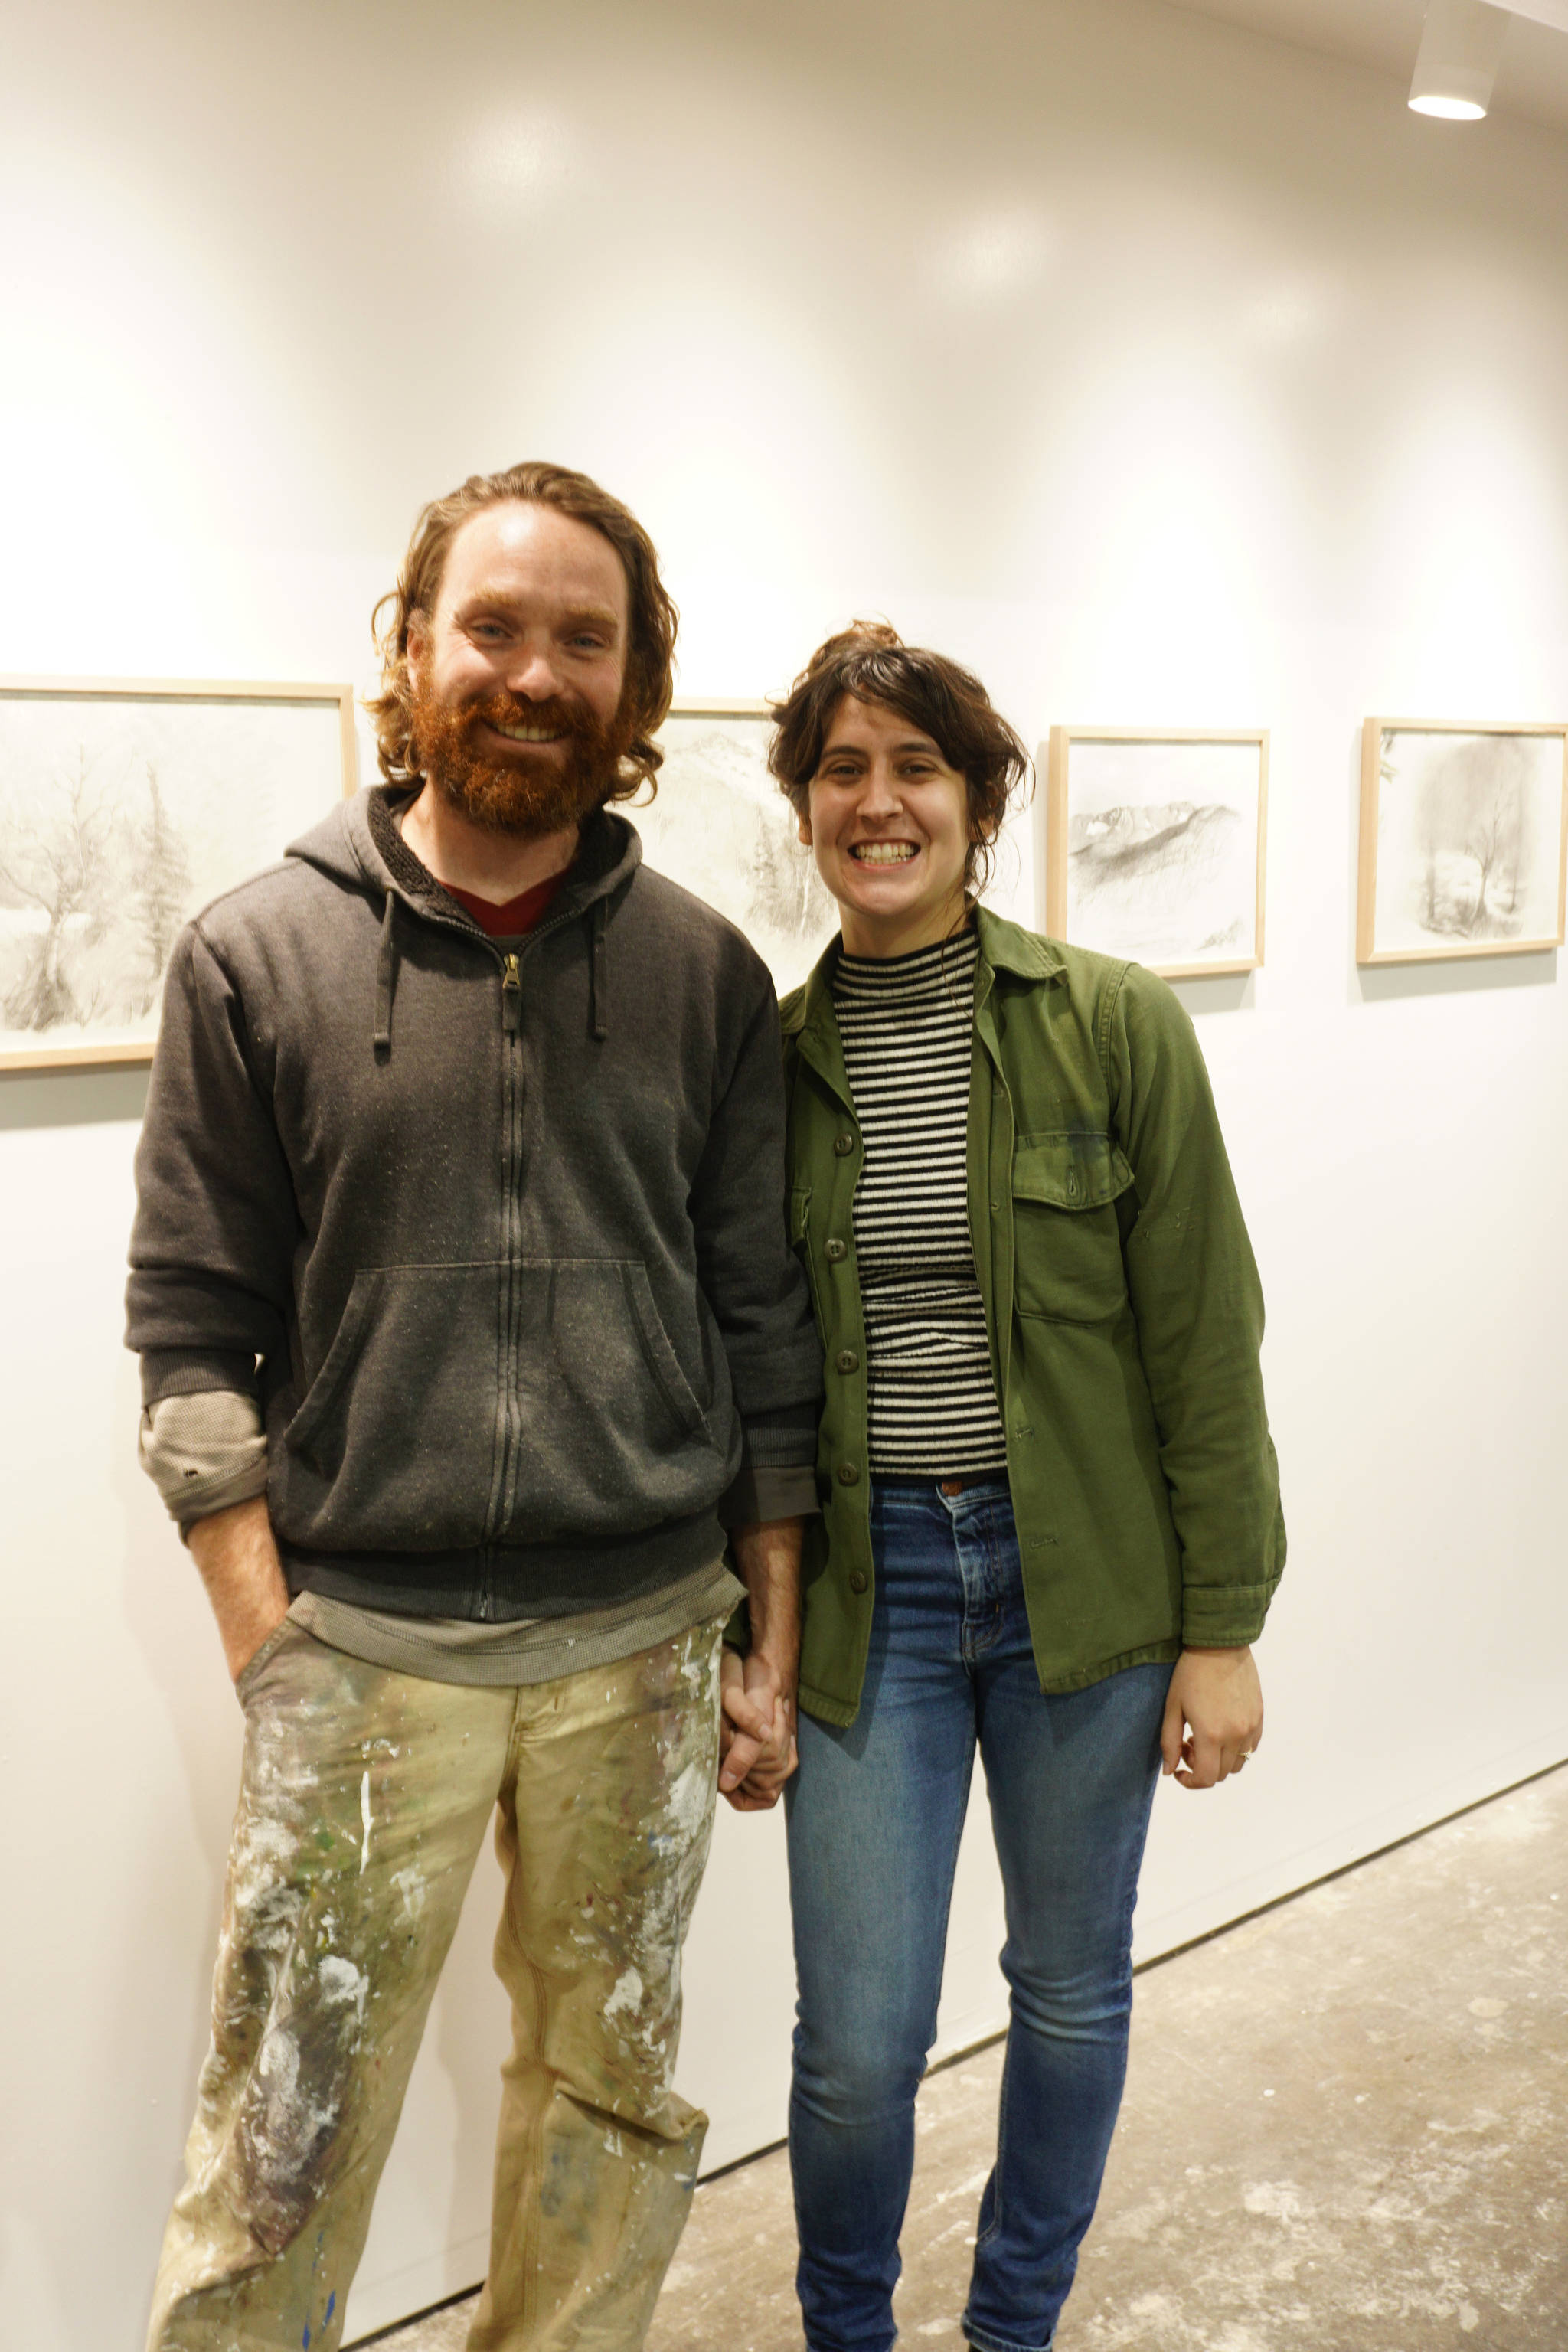 David and Elissa Pettibone pose on Tuesday, Oct. 16, 2018, by an exhibit of Karl Koett’s work at The Shop, an art space the Pettibones started in August 2018 in Kachemak City, Alaska. The Shop includes gallery space, but provides studio and classroom space as its main focus. (Photo by Michael Armstrong/Homer News)